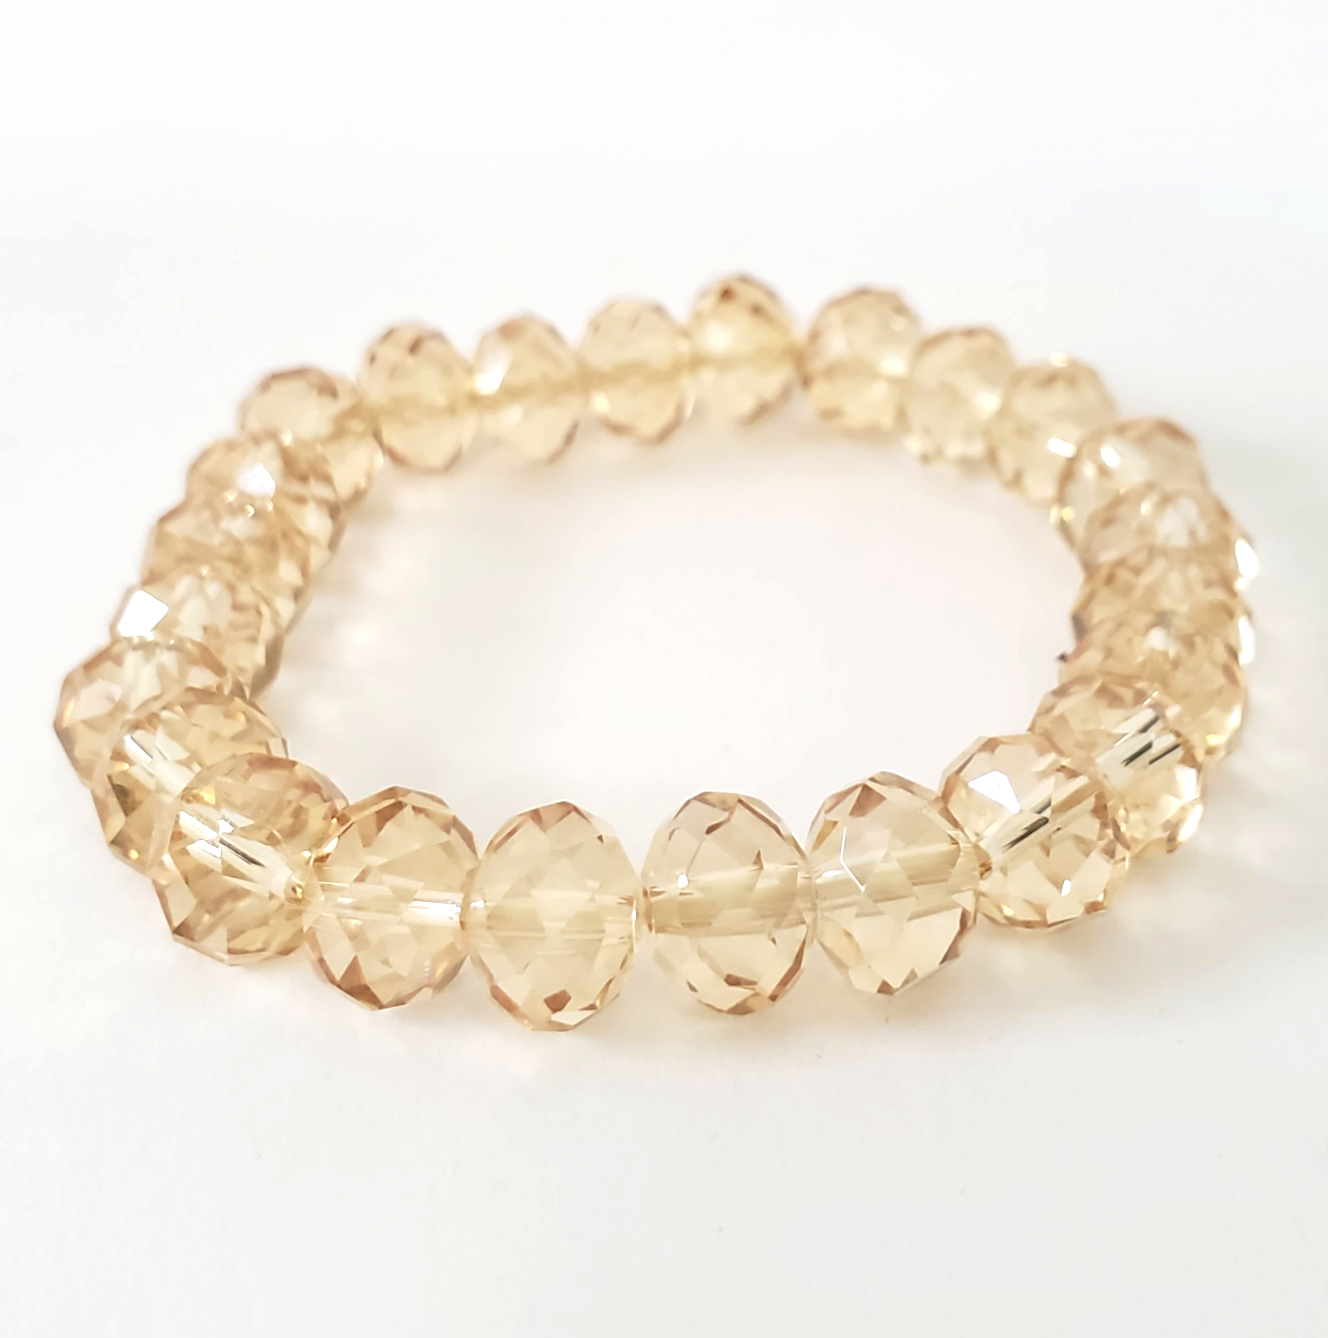 Faceted Glass Bead Stretch Bracelet - Light Champagne